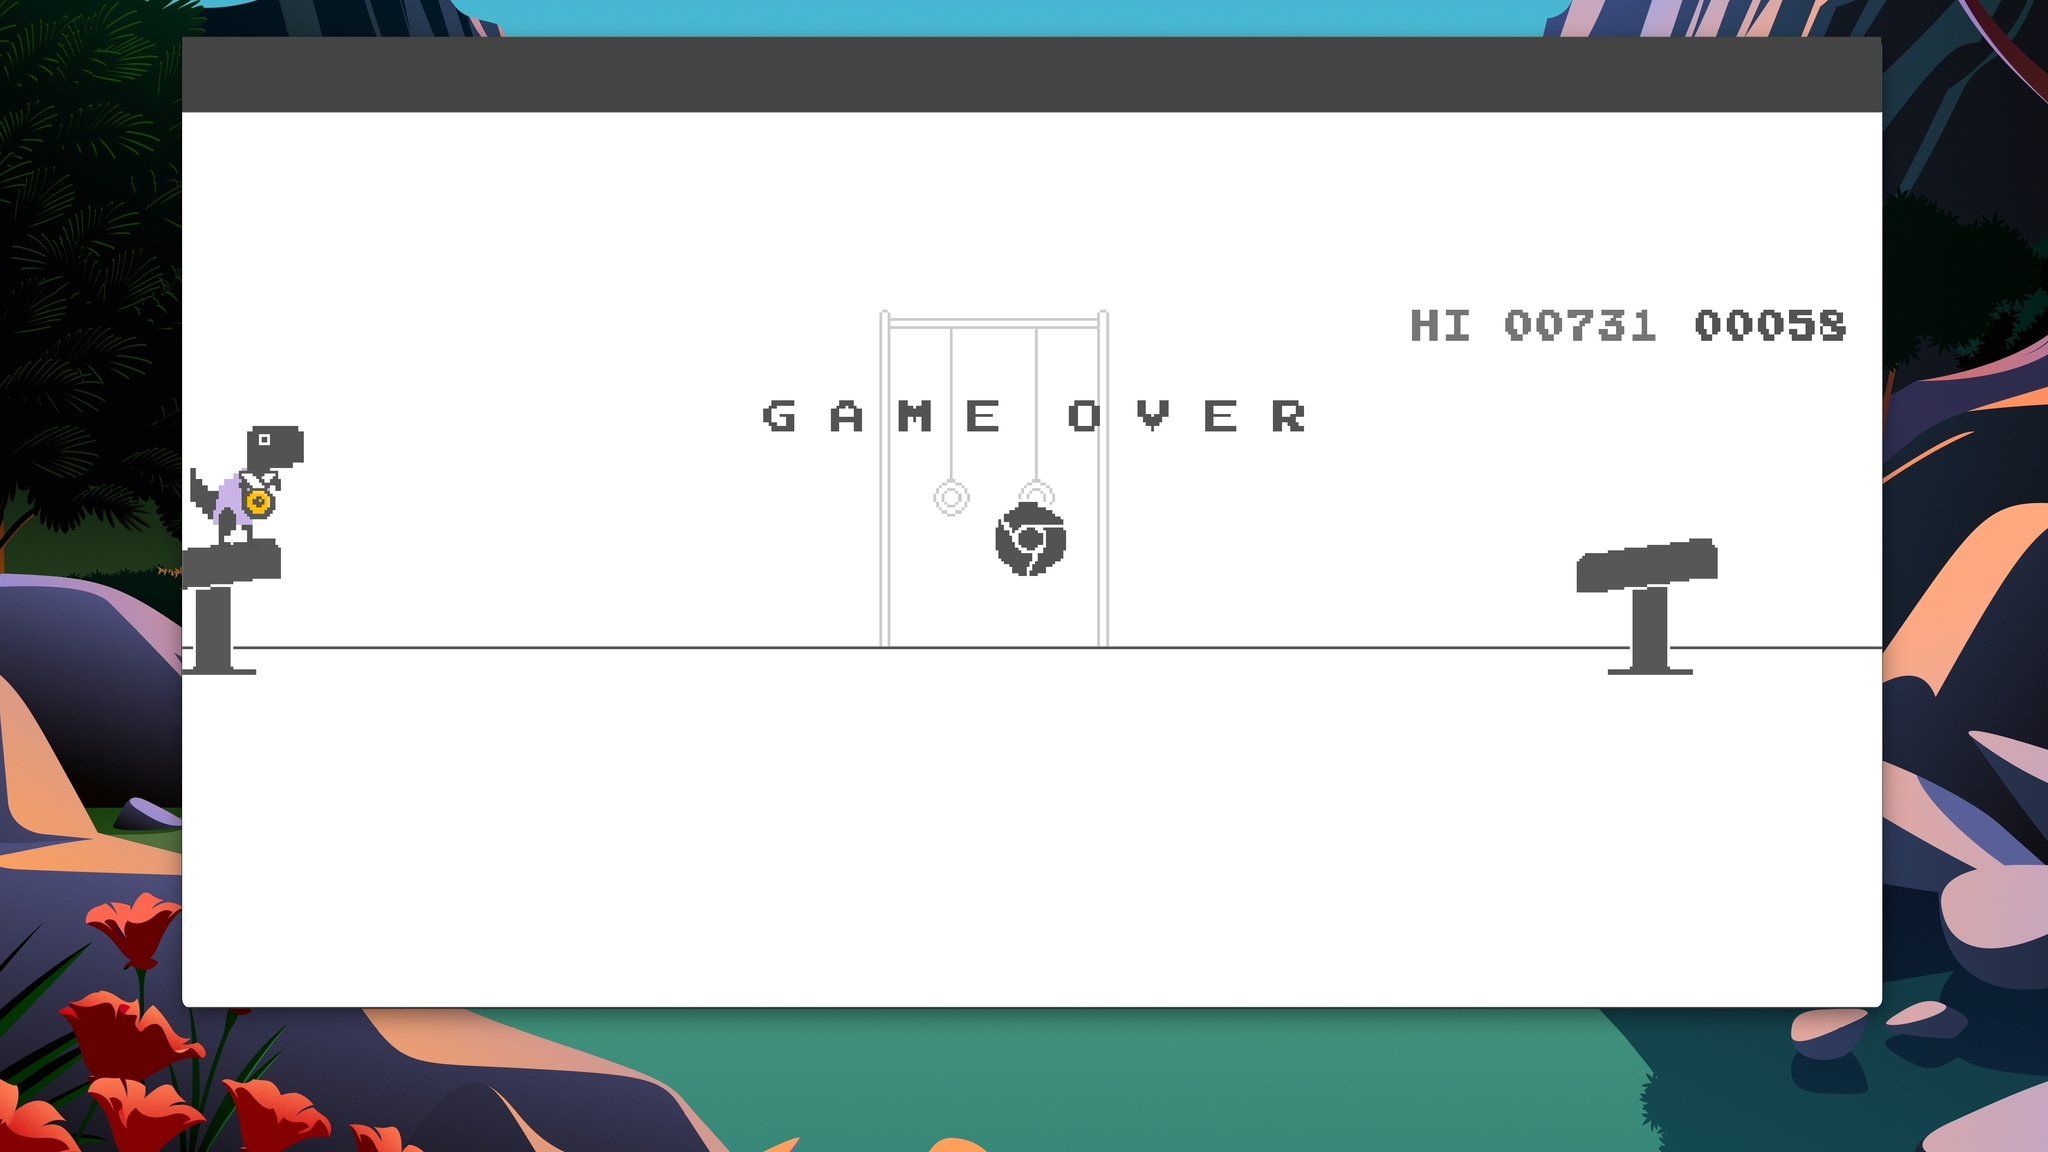 The dinosaur game in Google Chrome gets a makeover for Tokyo Olympics